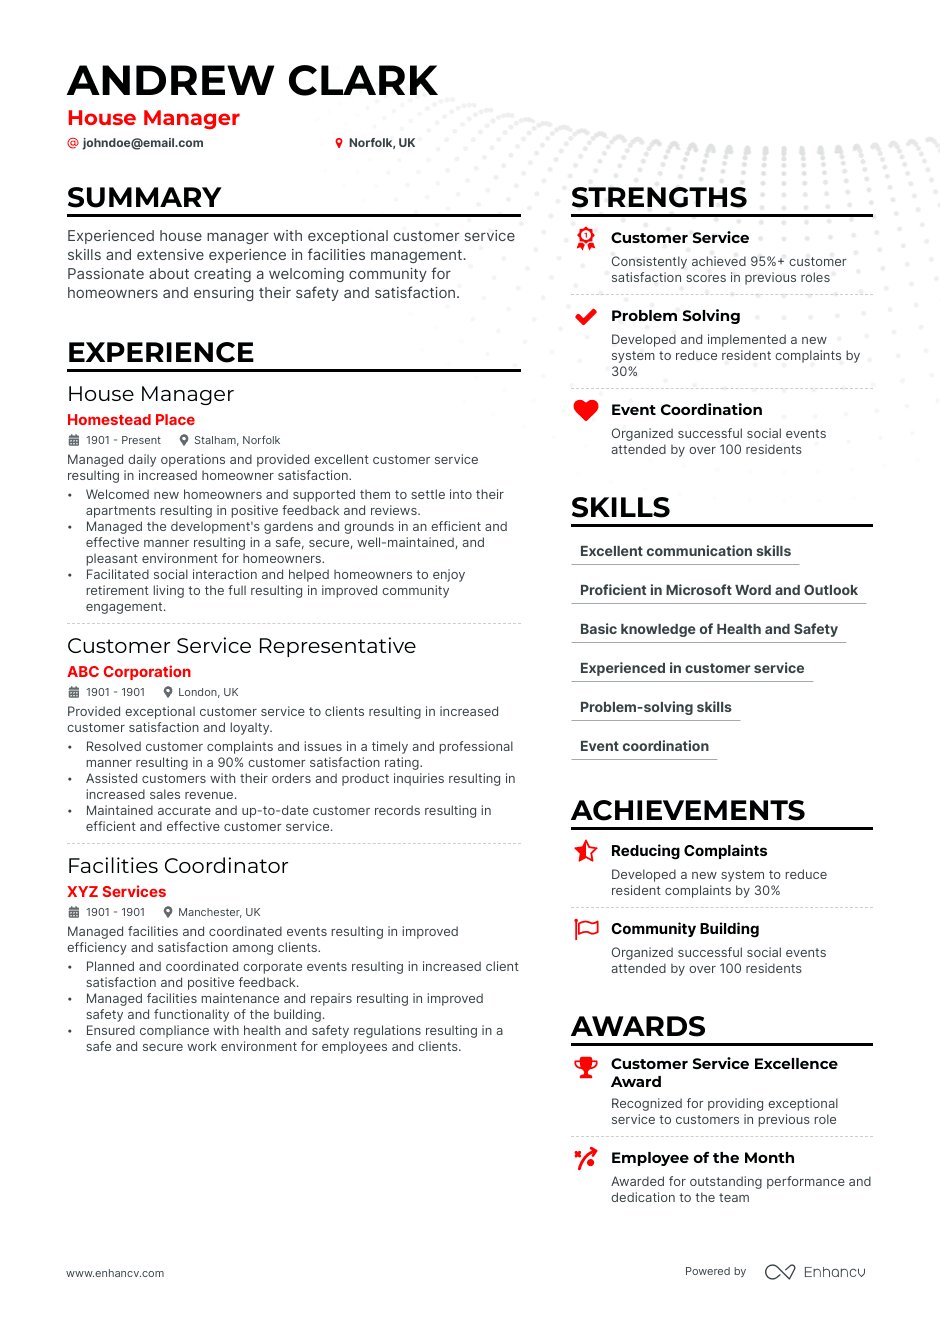 House Manager resume example